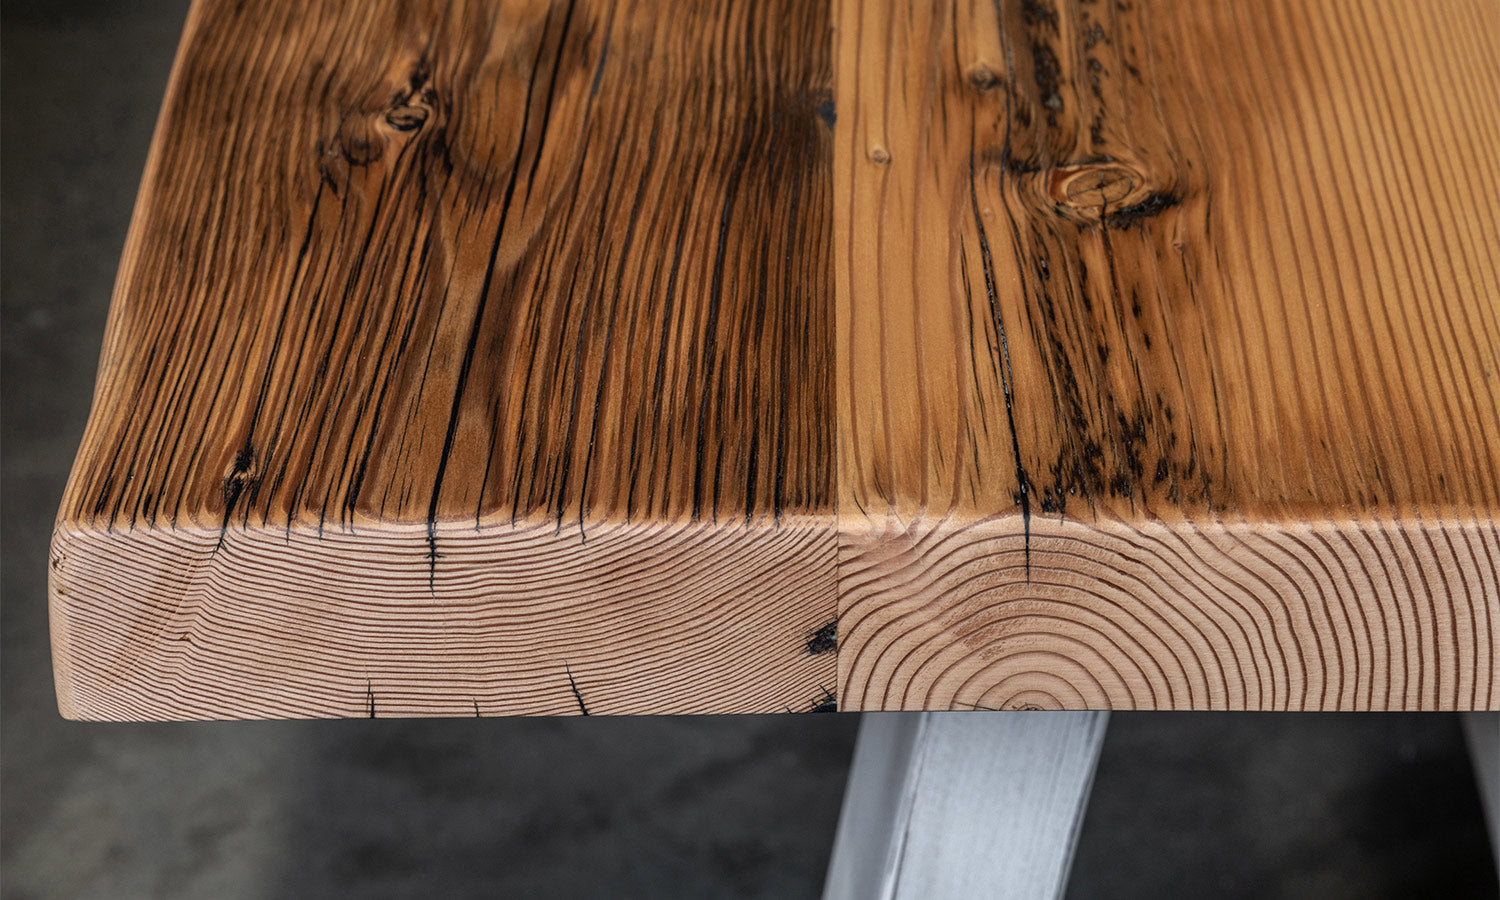 Hamptons Recycled Timber Wood Baltic Pine Dining Table Perth WA Detail